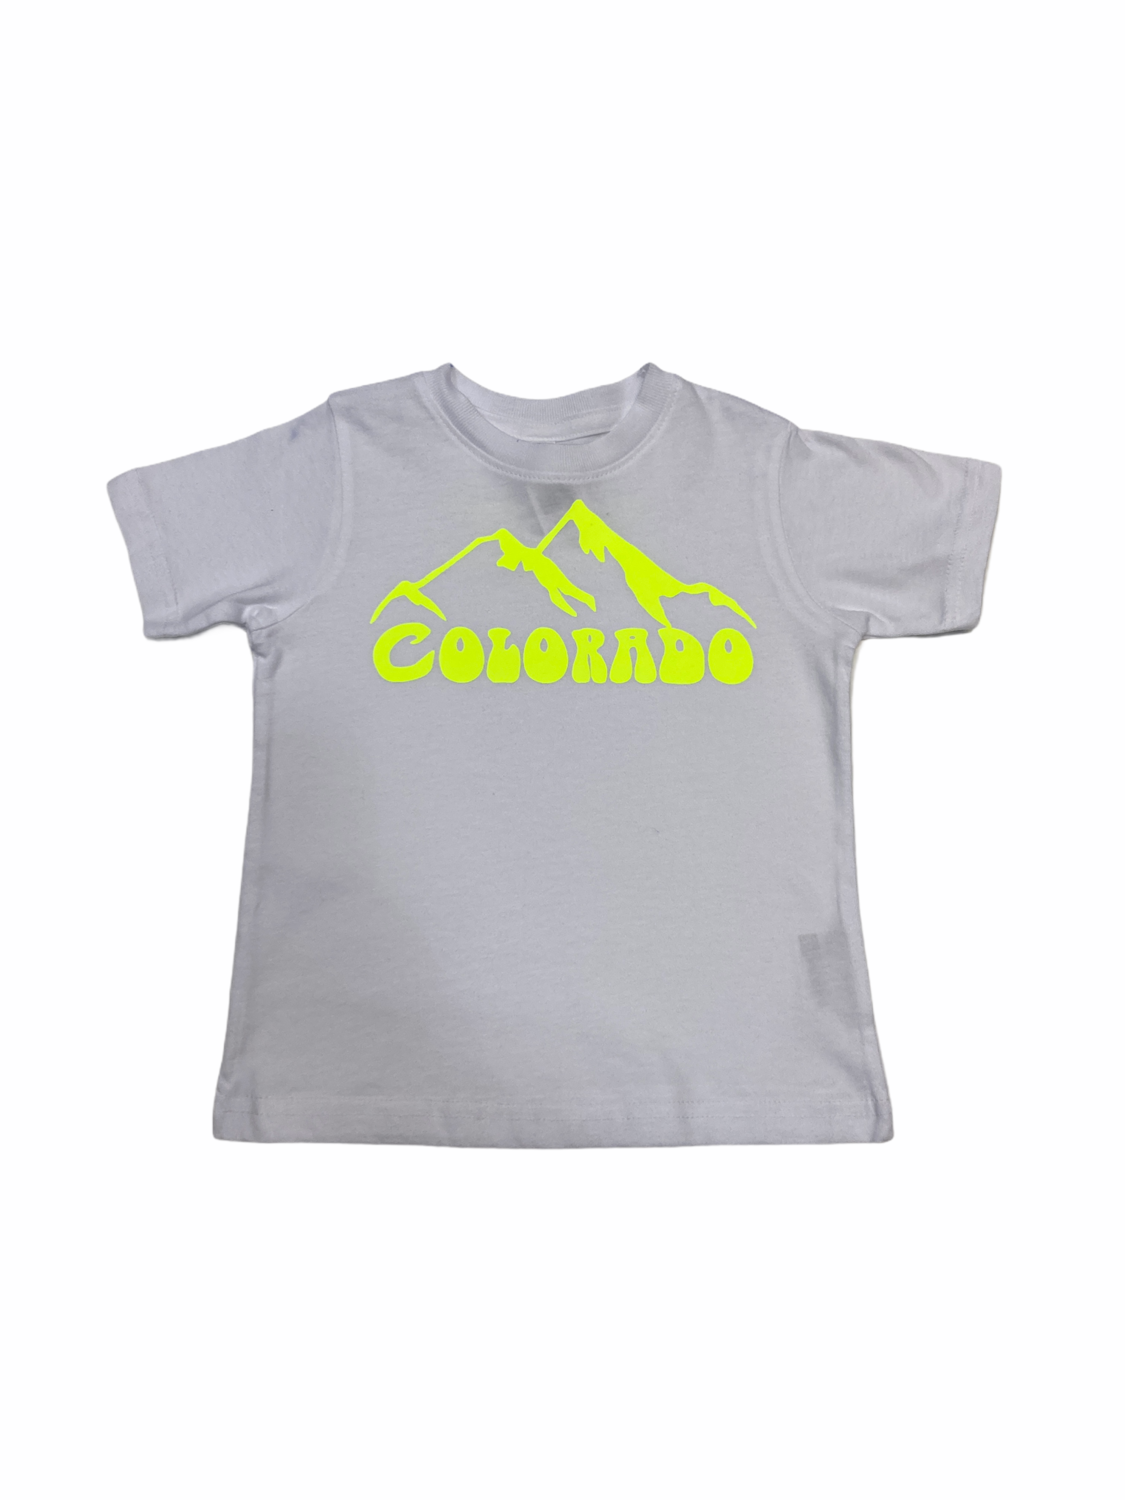 Yellow Colorado S/S Youth